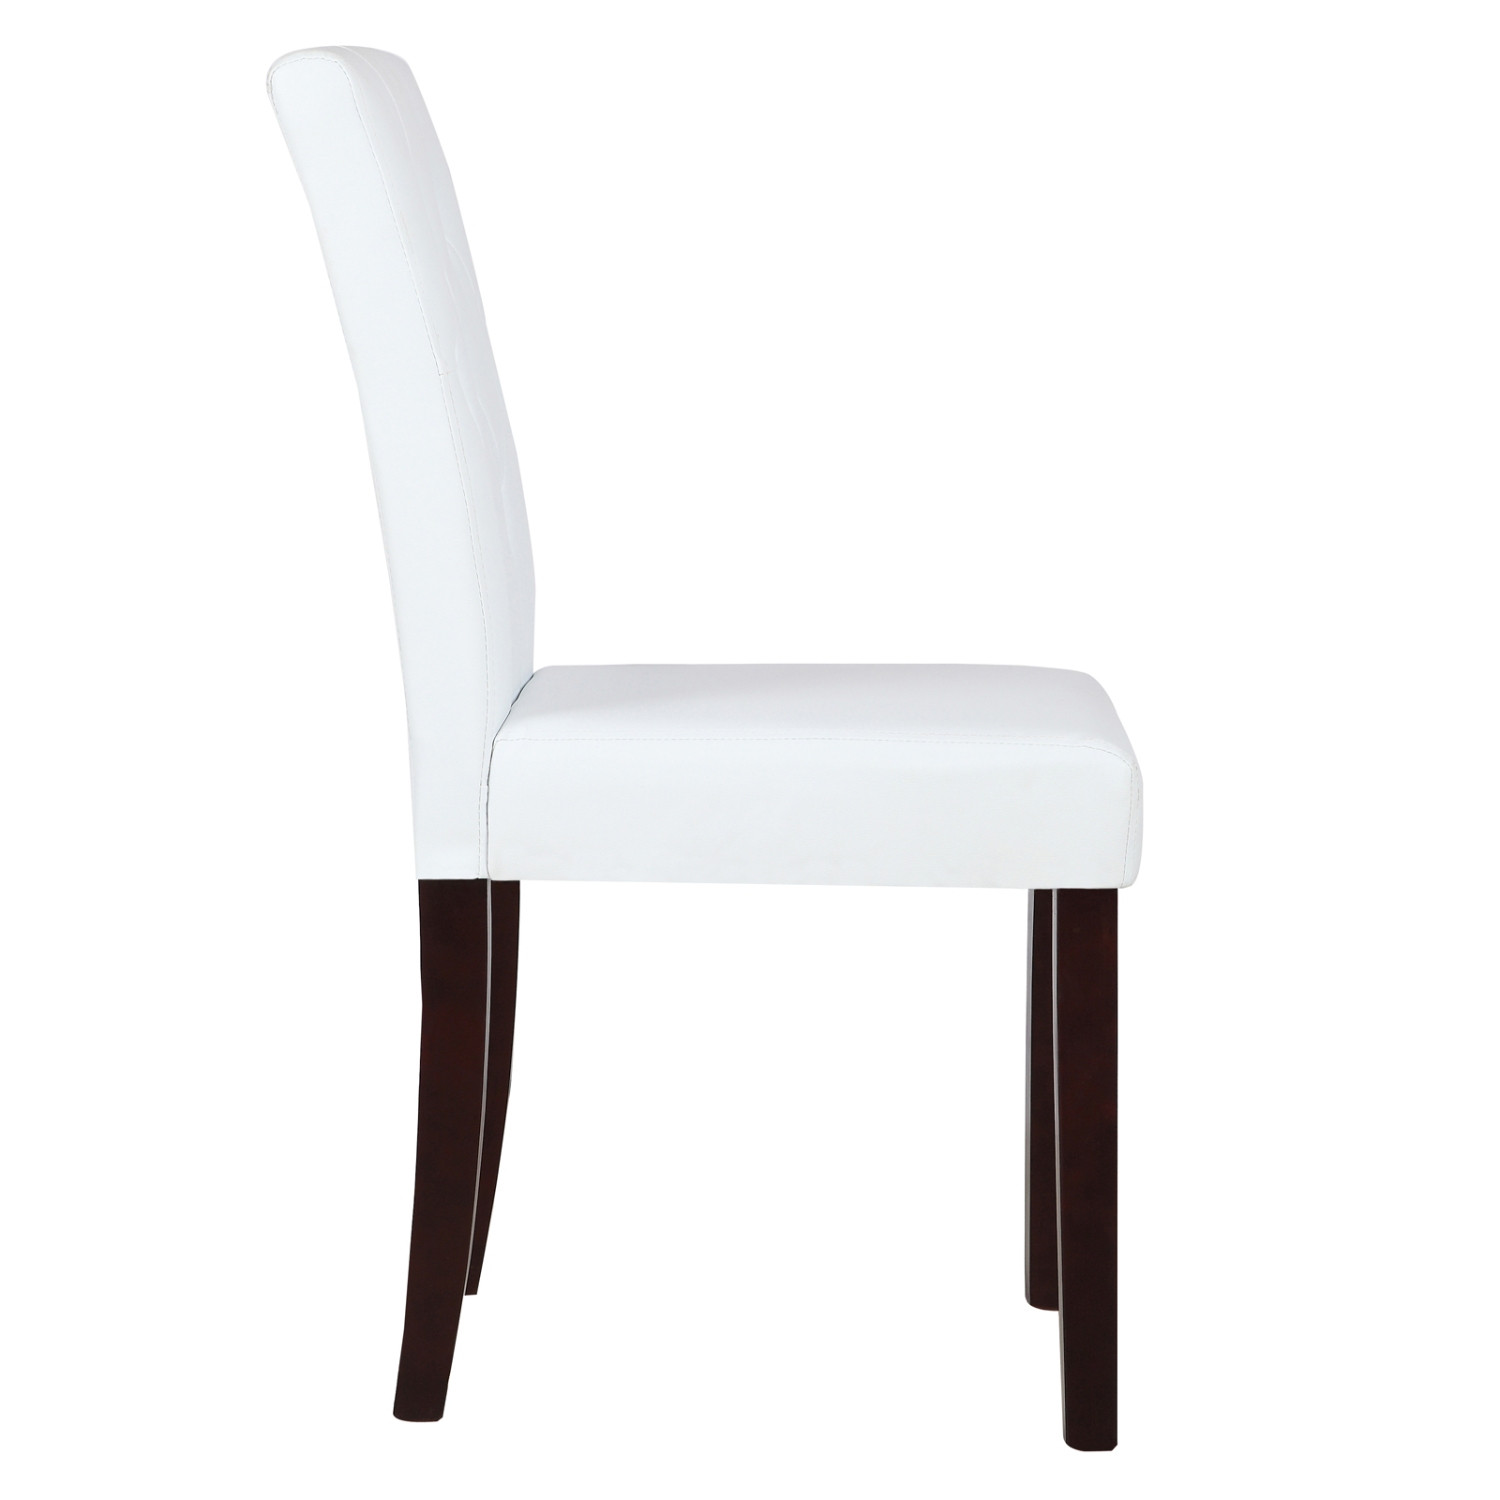 White Leather Kitchen Chairs
 Set of 2 Dining Chair White Leather Kitchen Dinette with